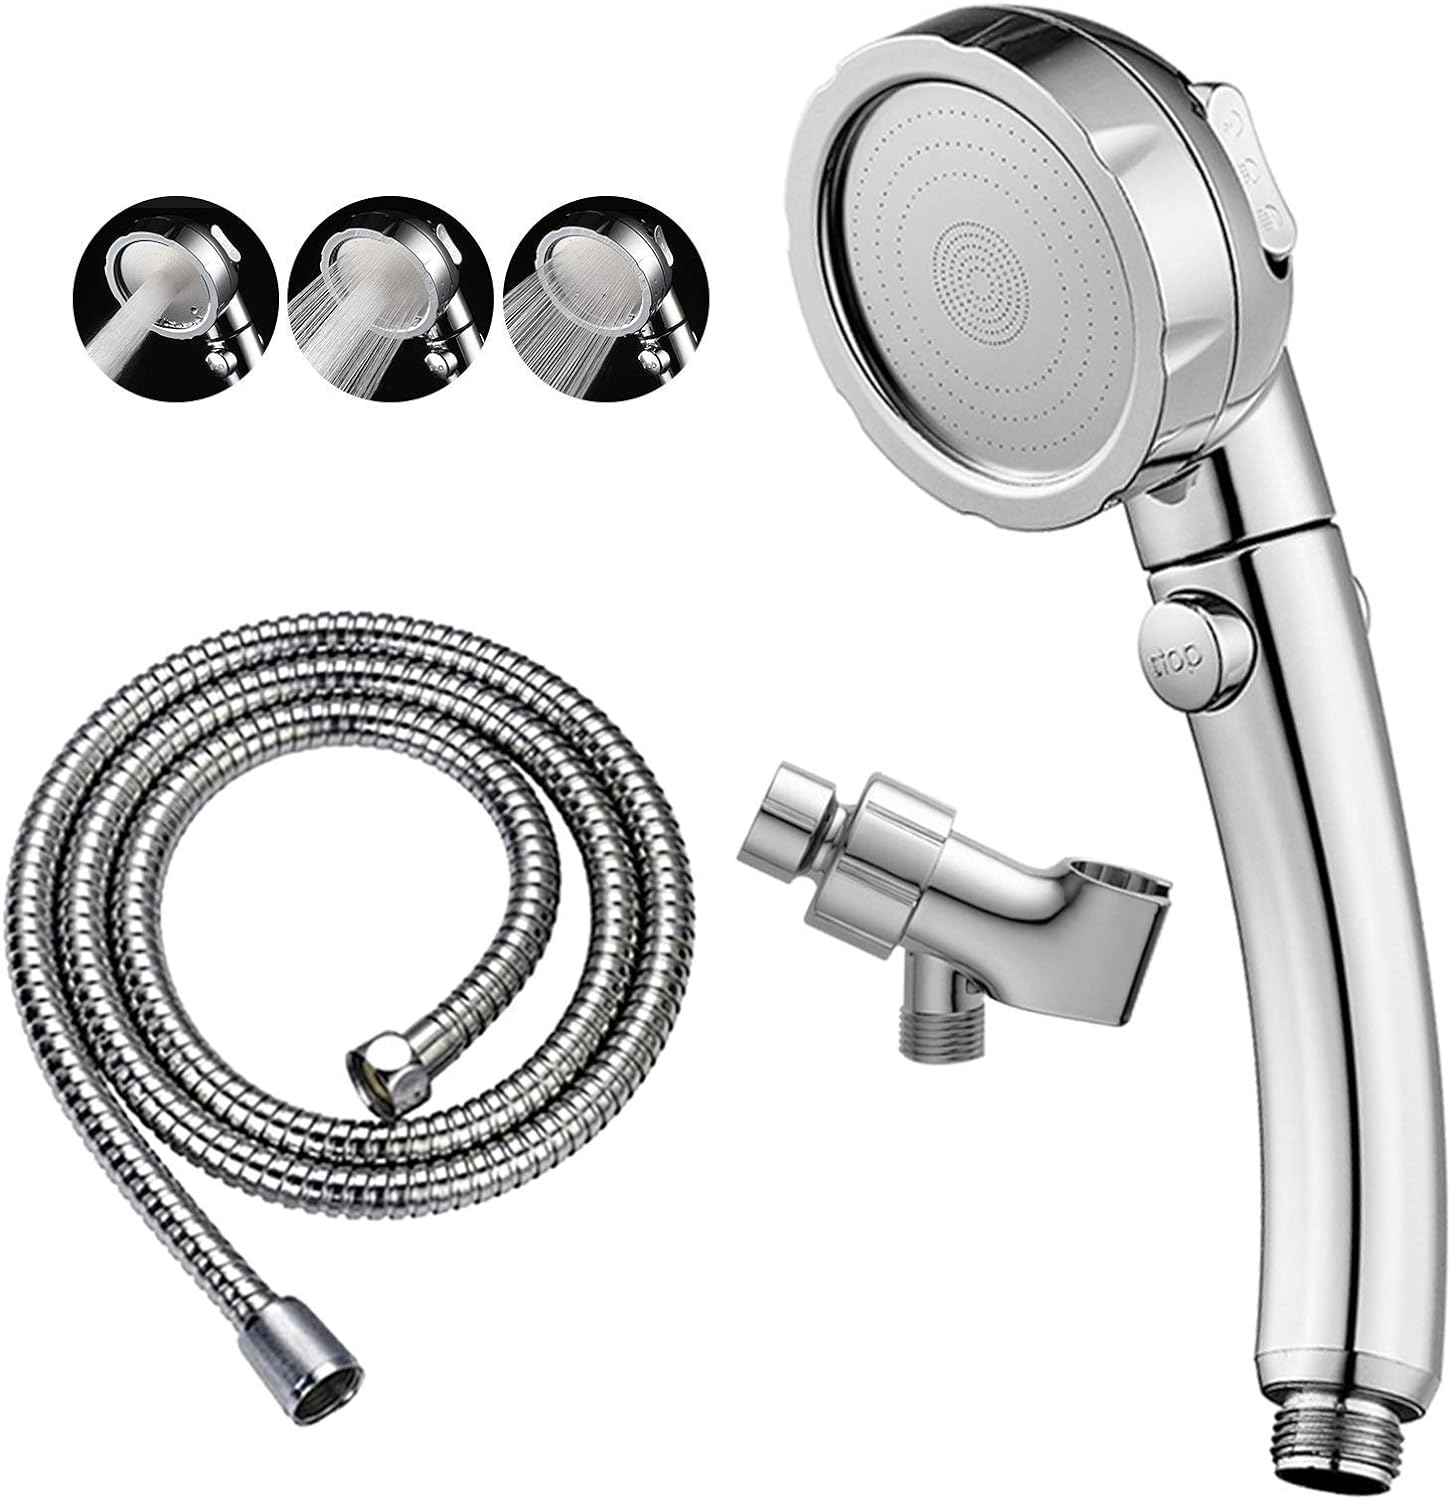 KAIYING Chrome High Pressure Handheld Shower Head with ON/OFF Pause Switch, 3 Spray Modes Shower Wand with Shut Off Button, Removable Camper Shower Head with Hose and Adjustable Angle Bracket